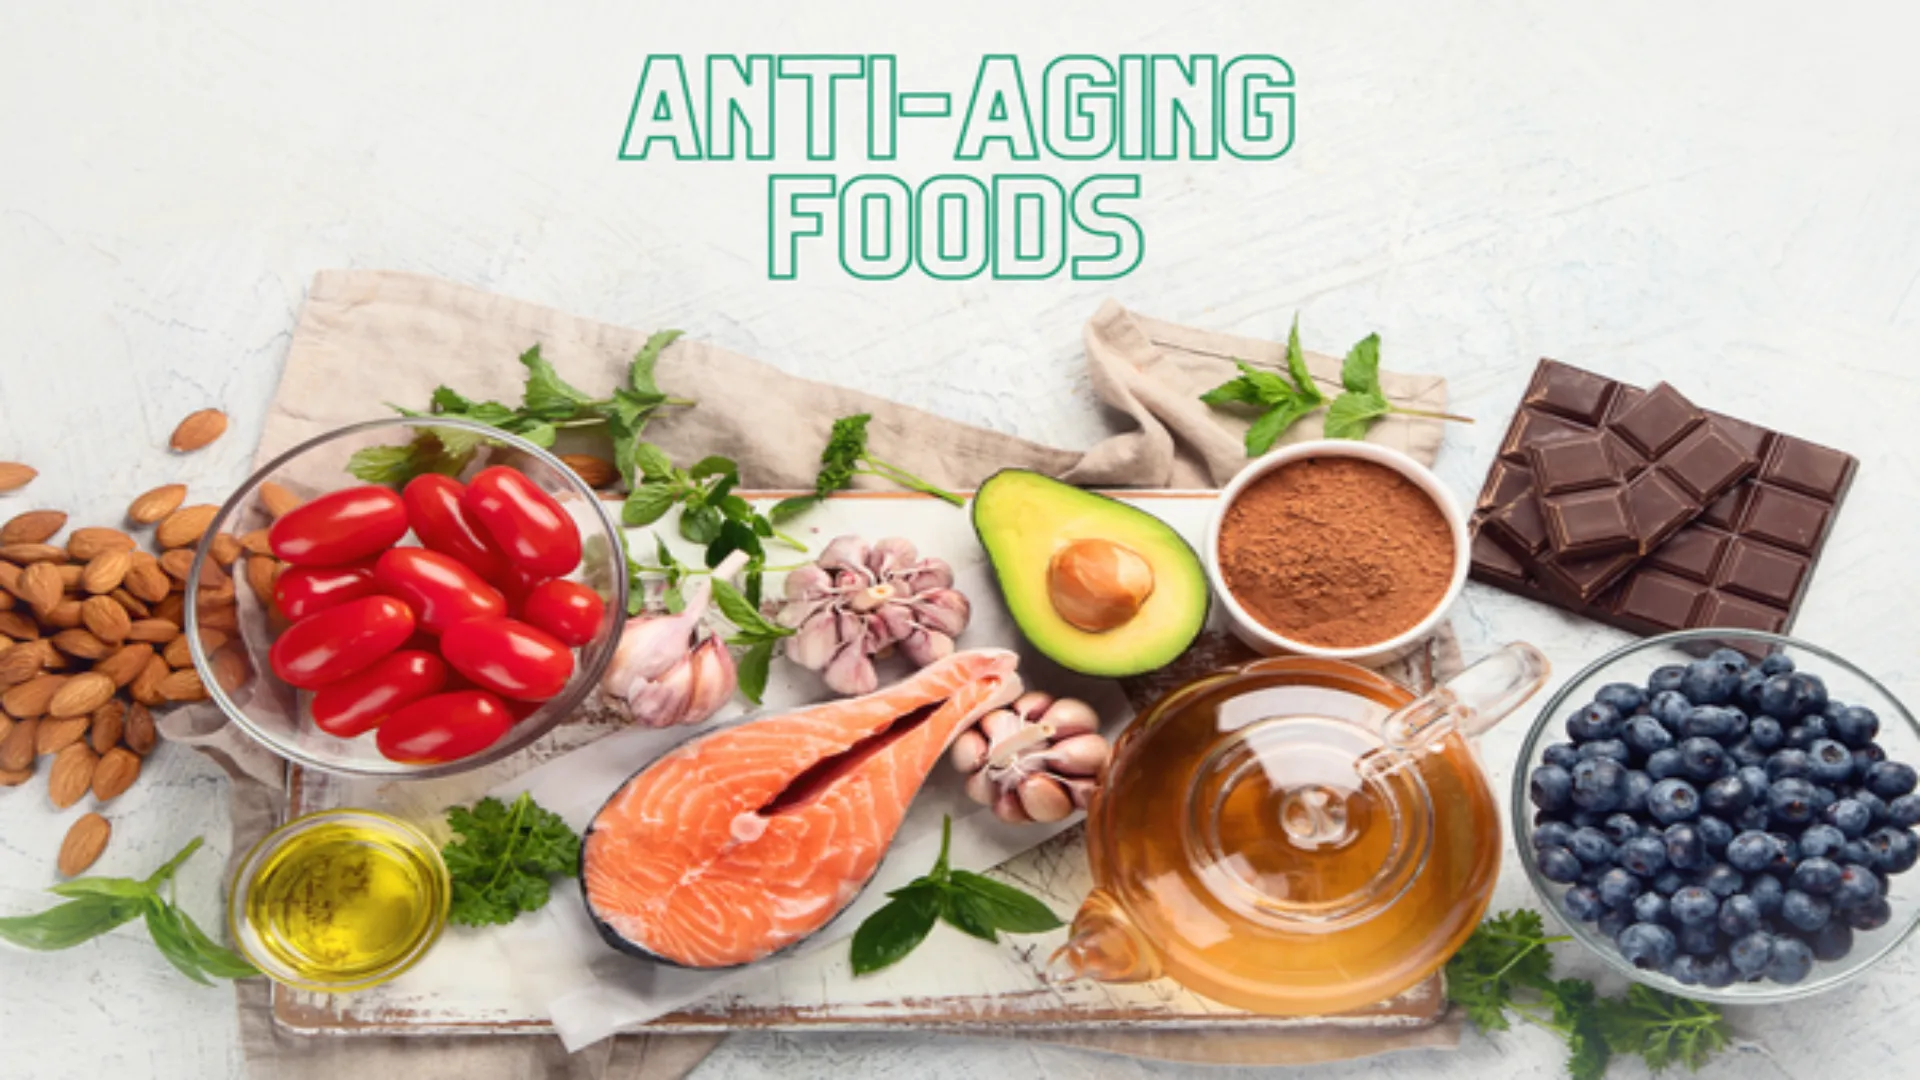 10 anti-ageing foods to help you achieve youthful, glowing skin.